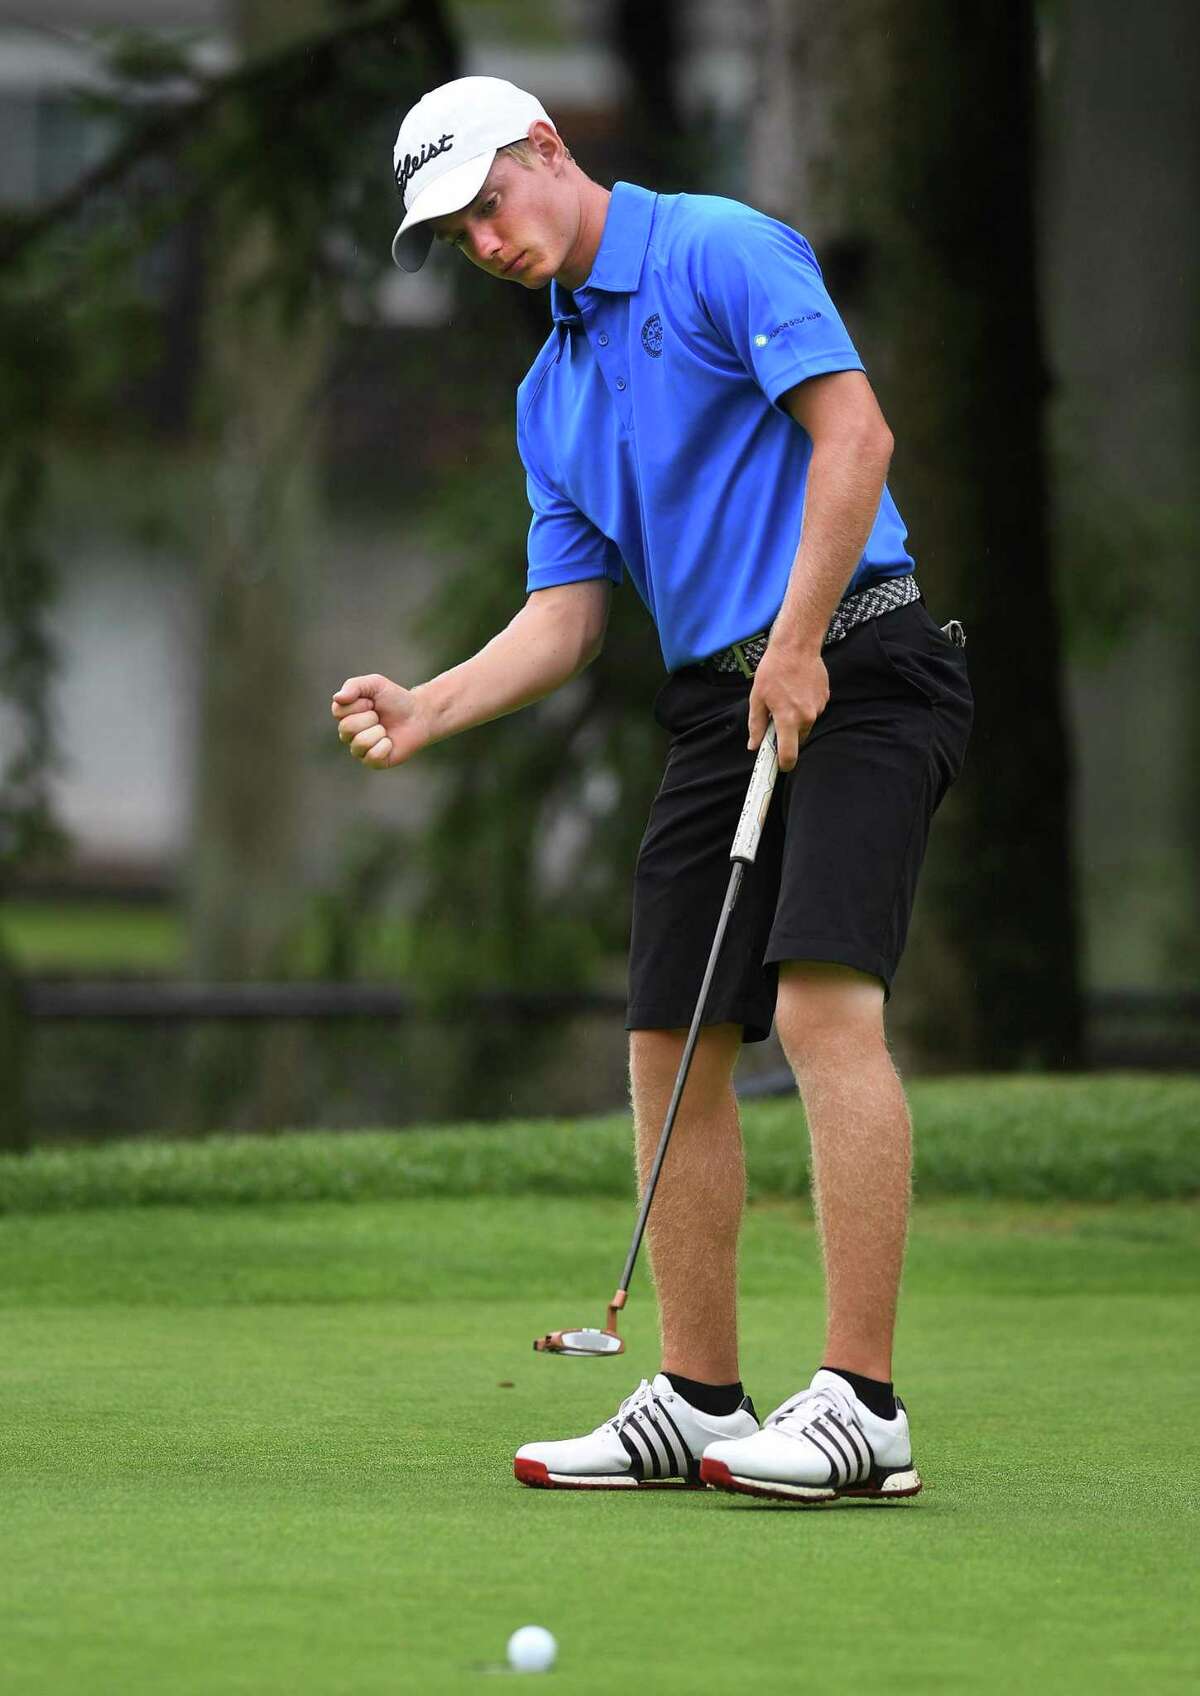 Chris Fosdick, seen here in 2019, advanced to the final of the State Amateur on Wednesday.